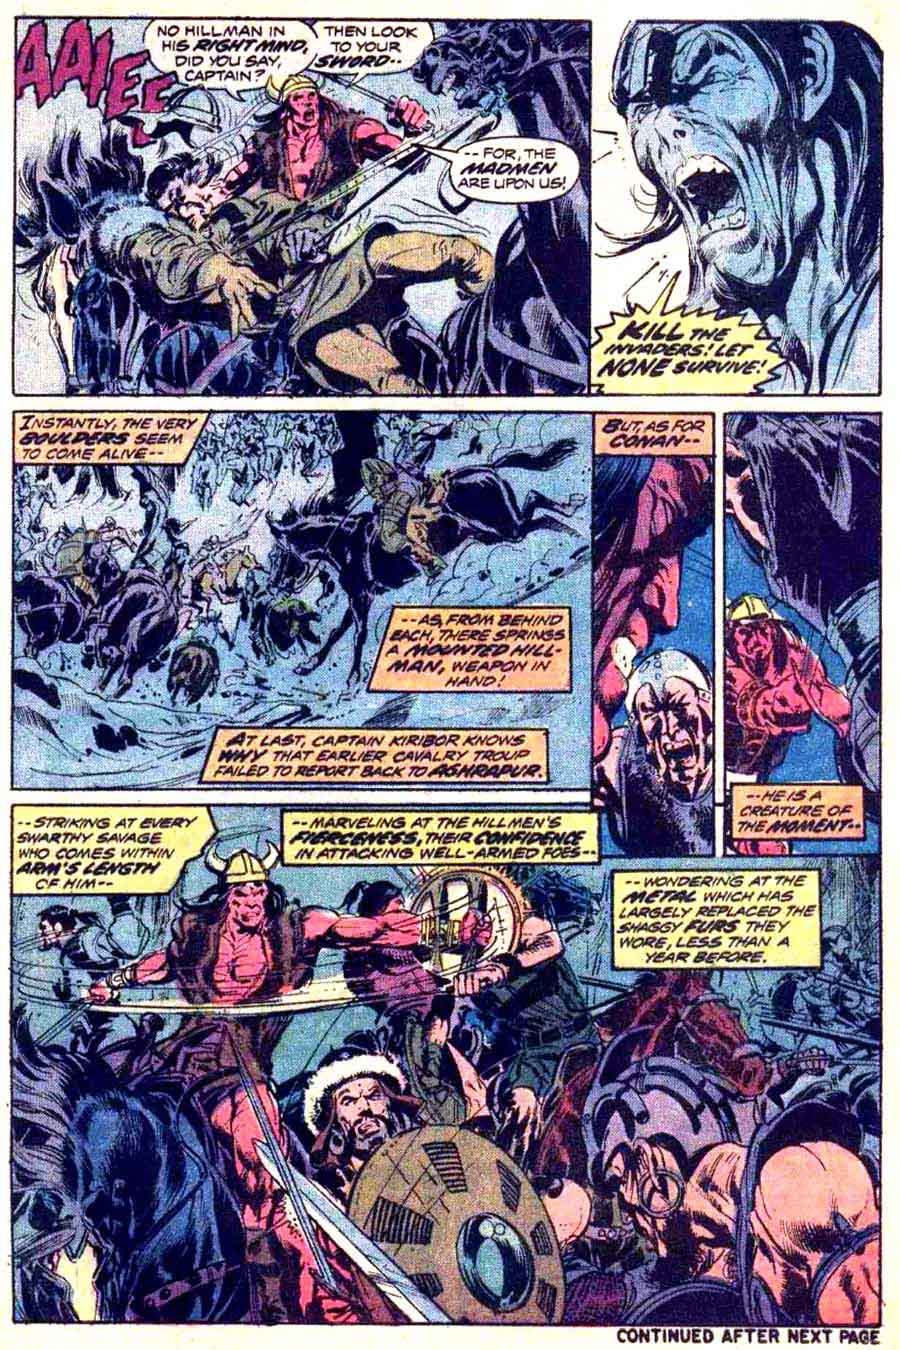 Conan the Barbarian v1 #37 marvel comic book page art by Neal Adams